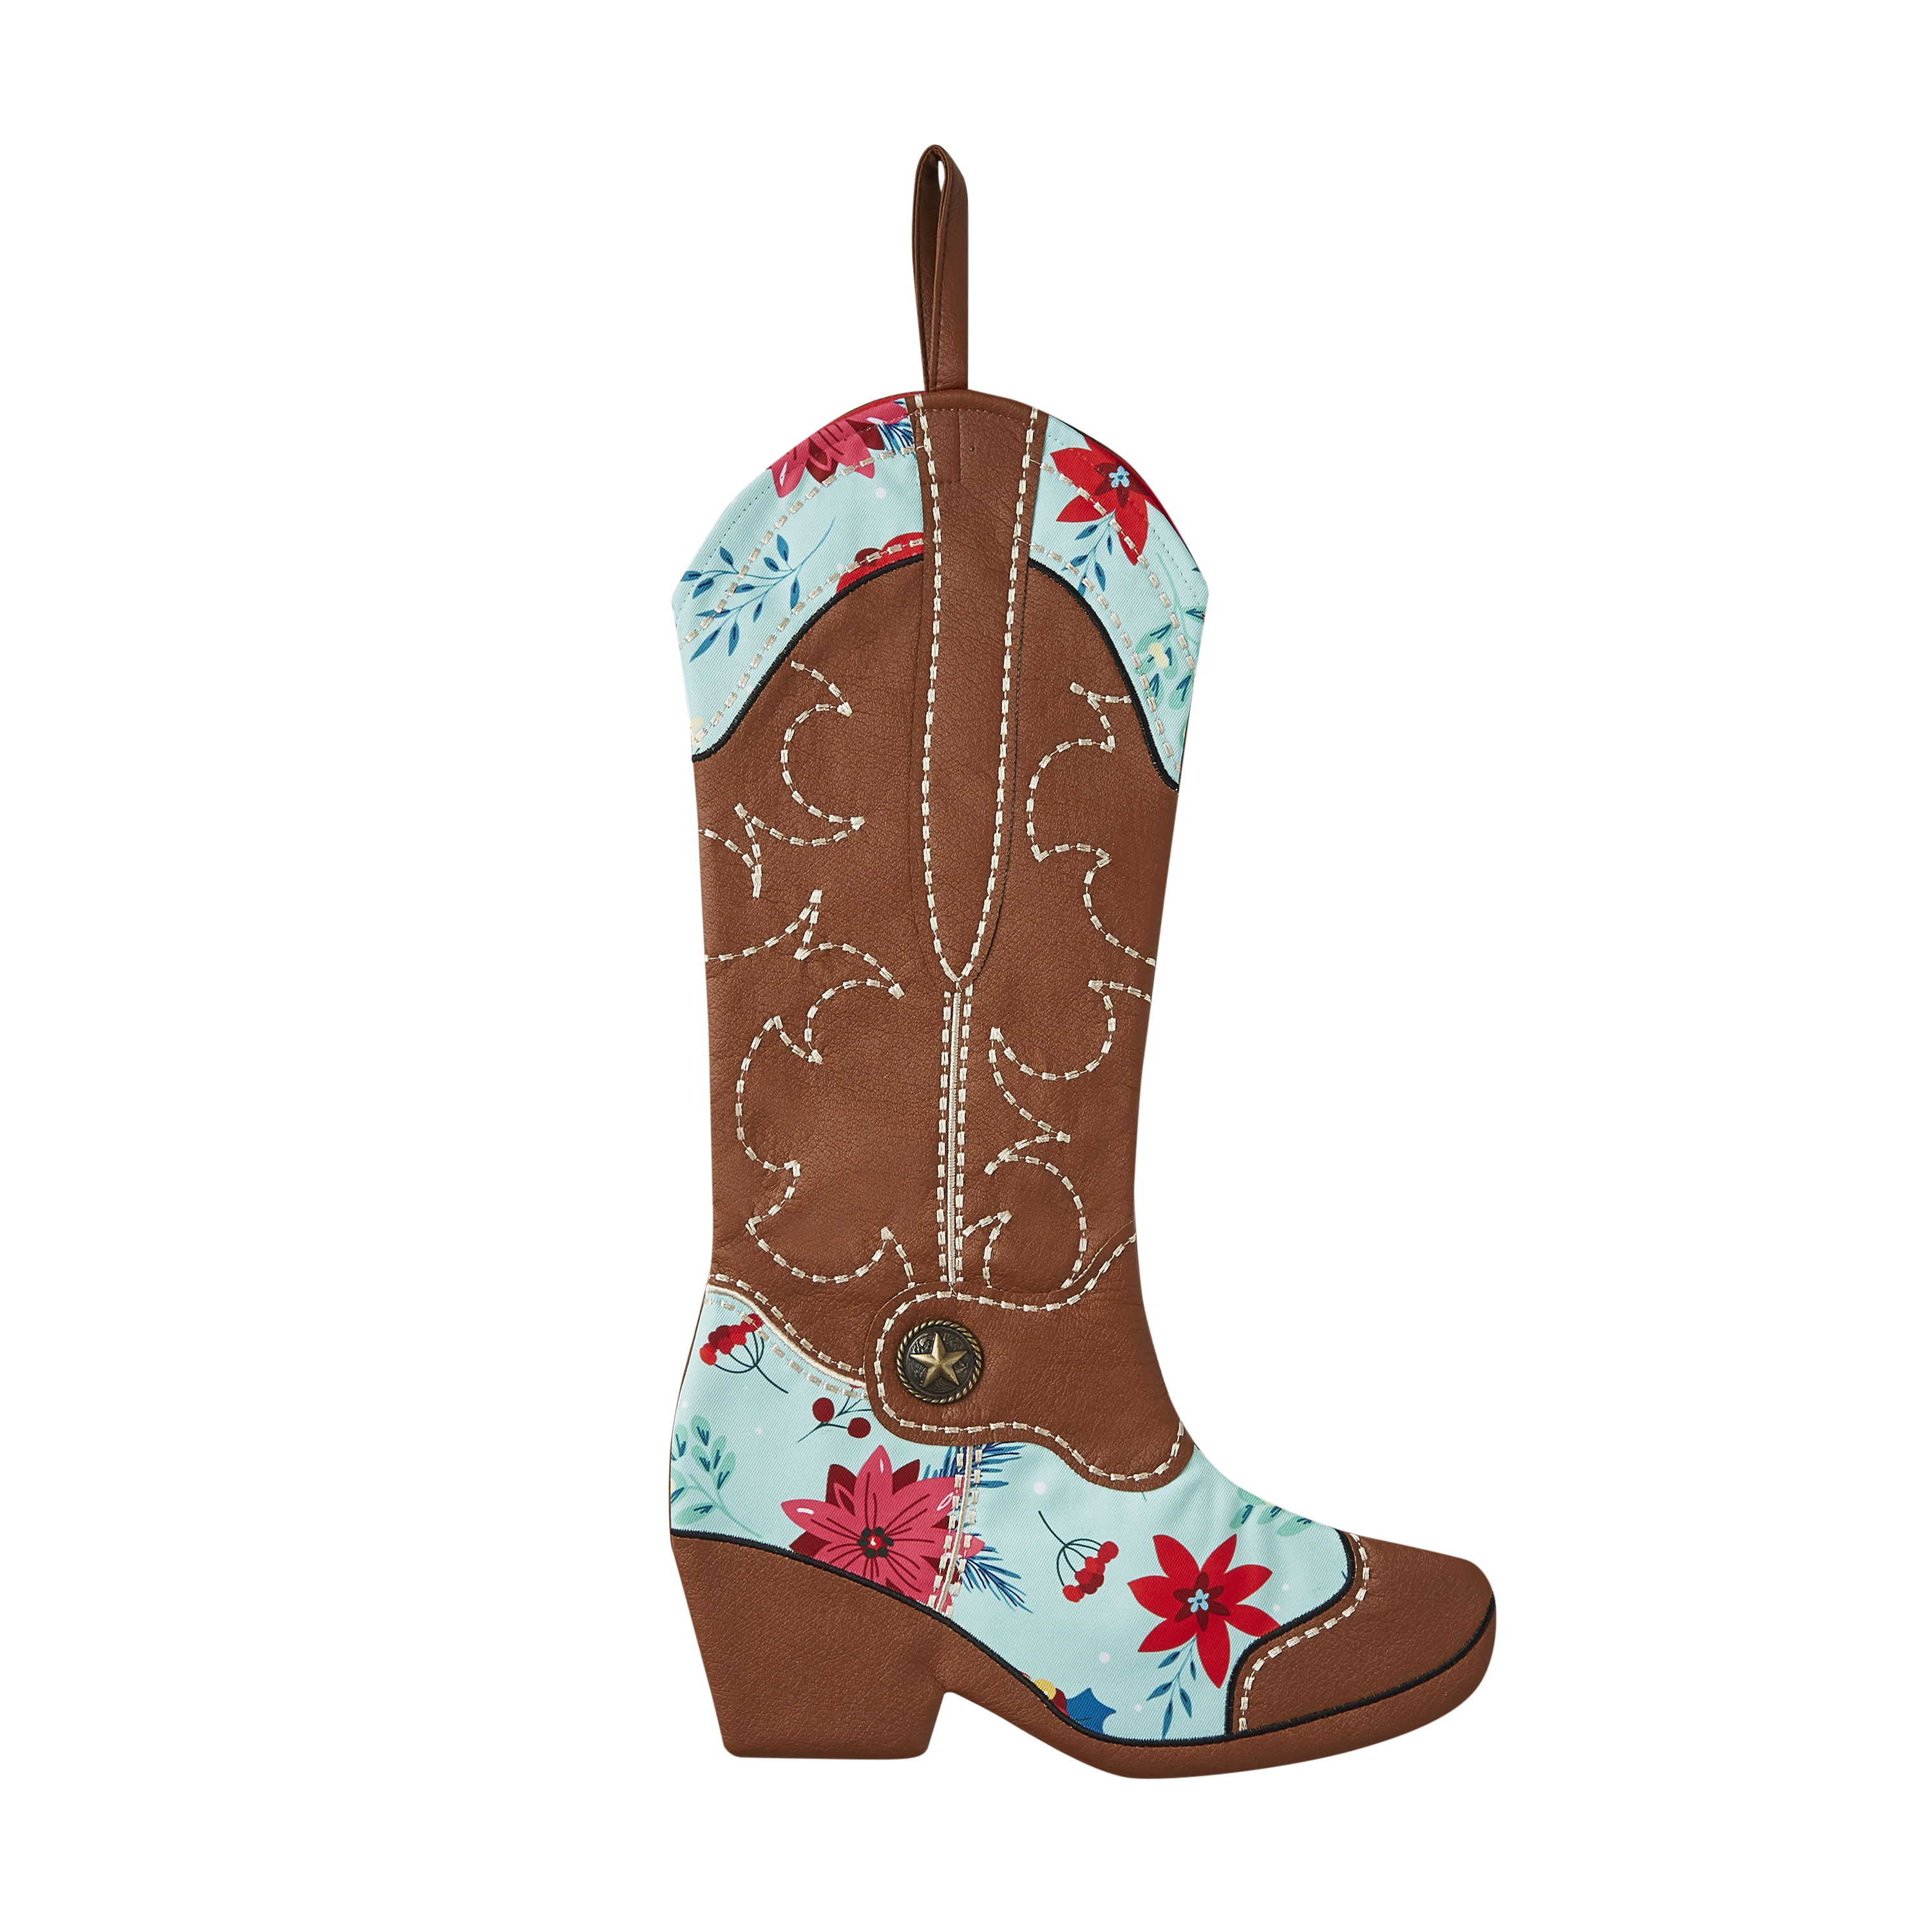 The Pioneer Woman Floral Boot Multi-color Christmas Stocking, 20" - image 1 of 5